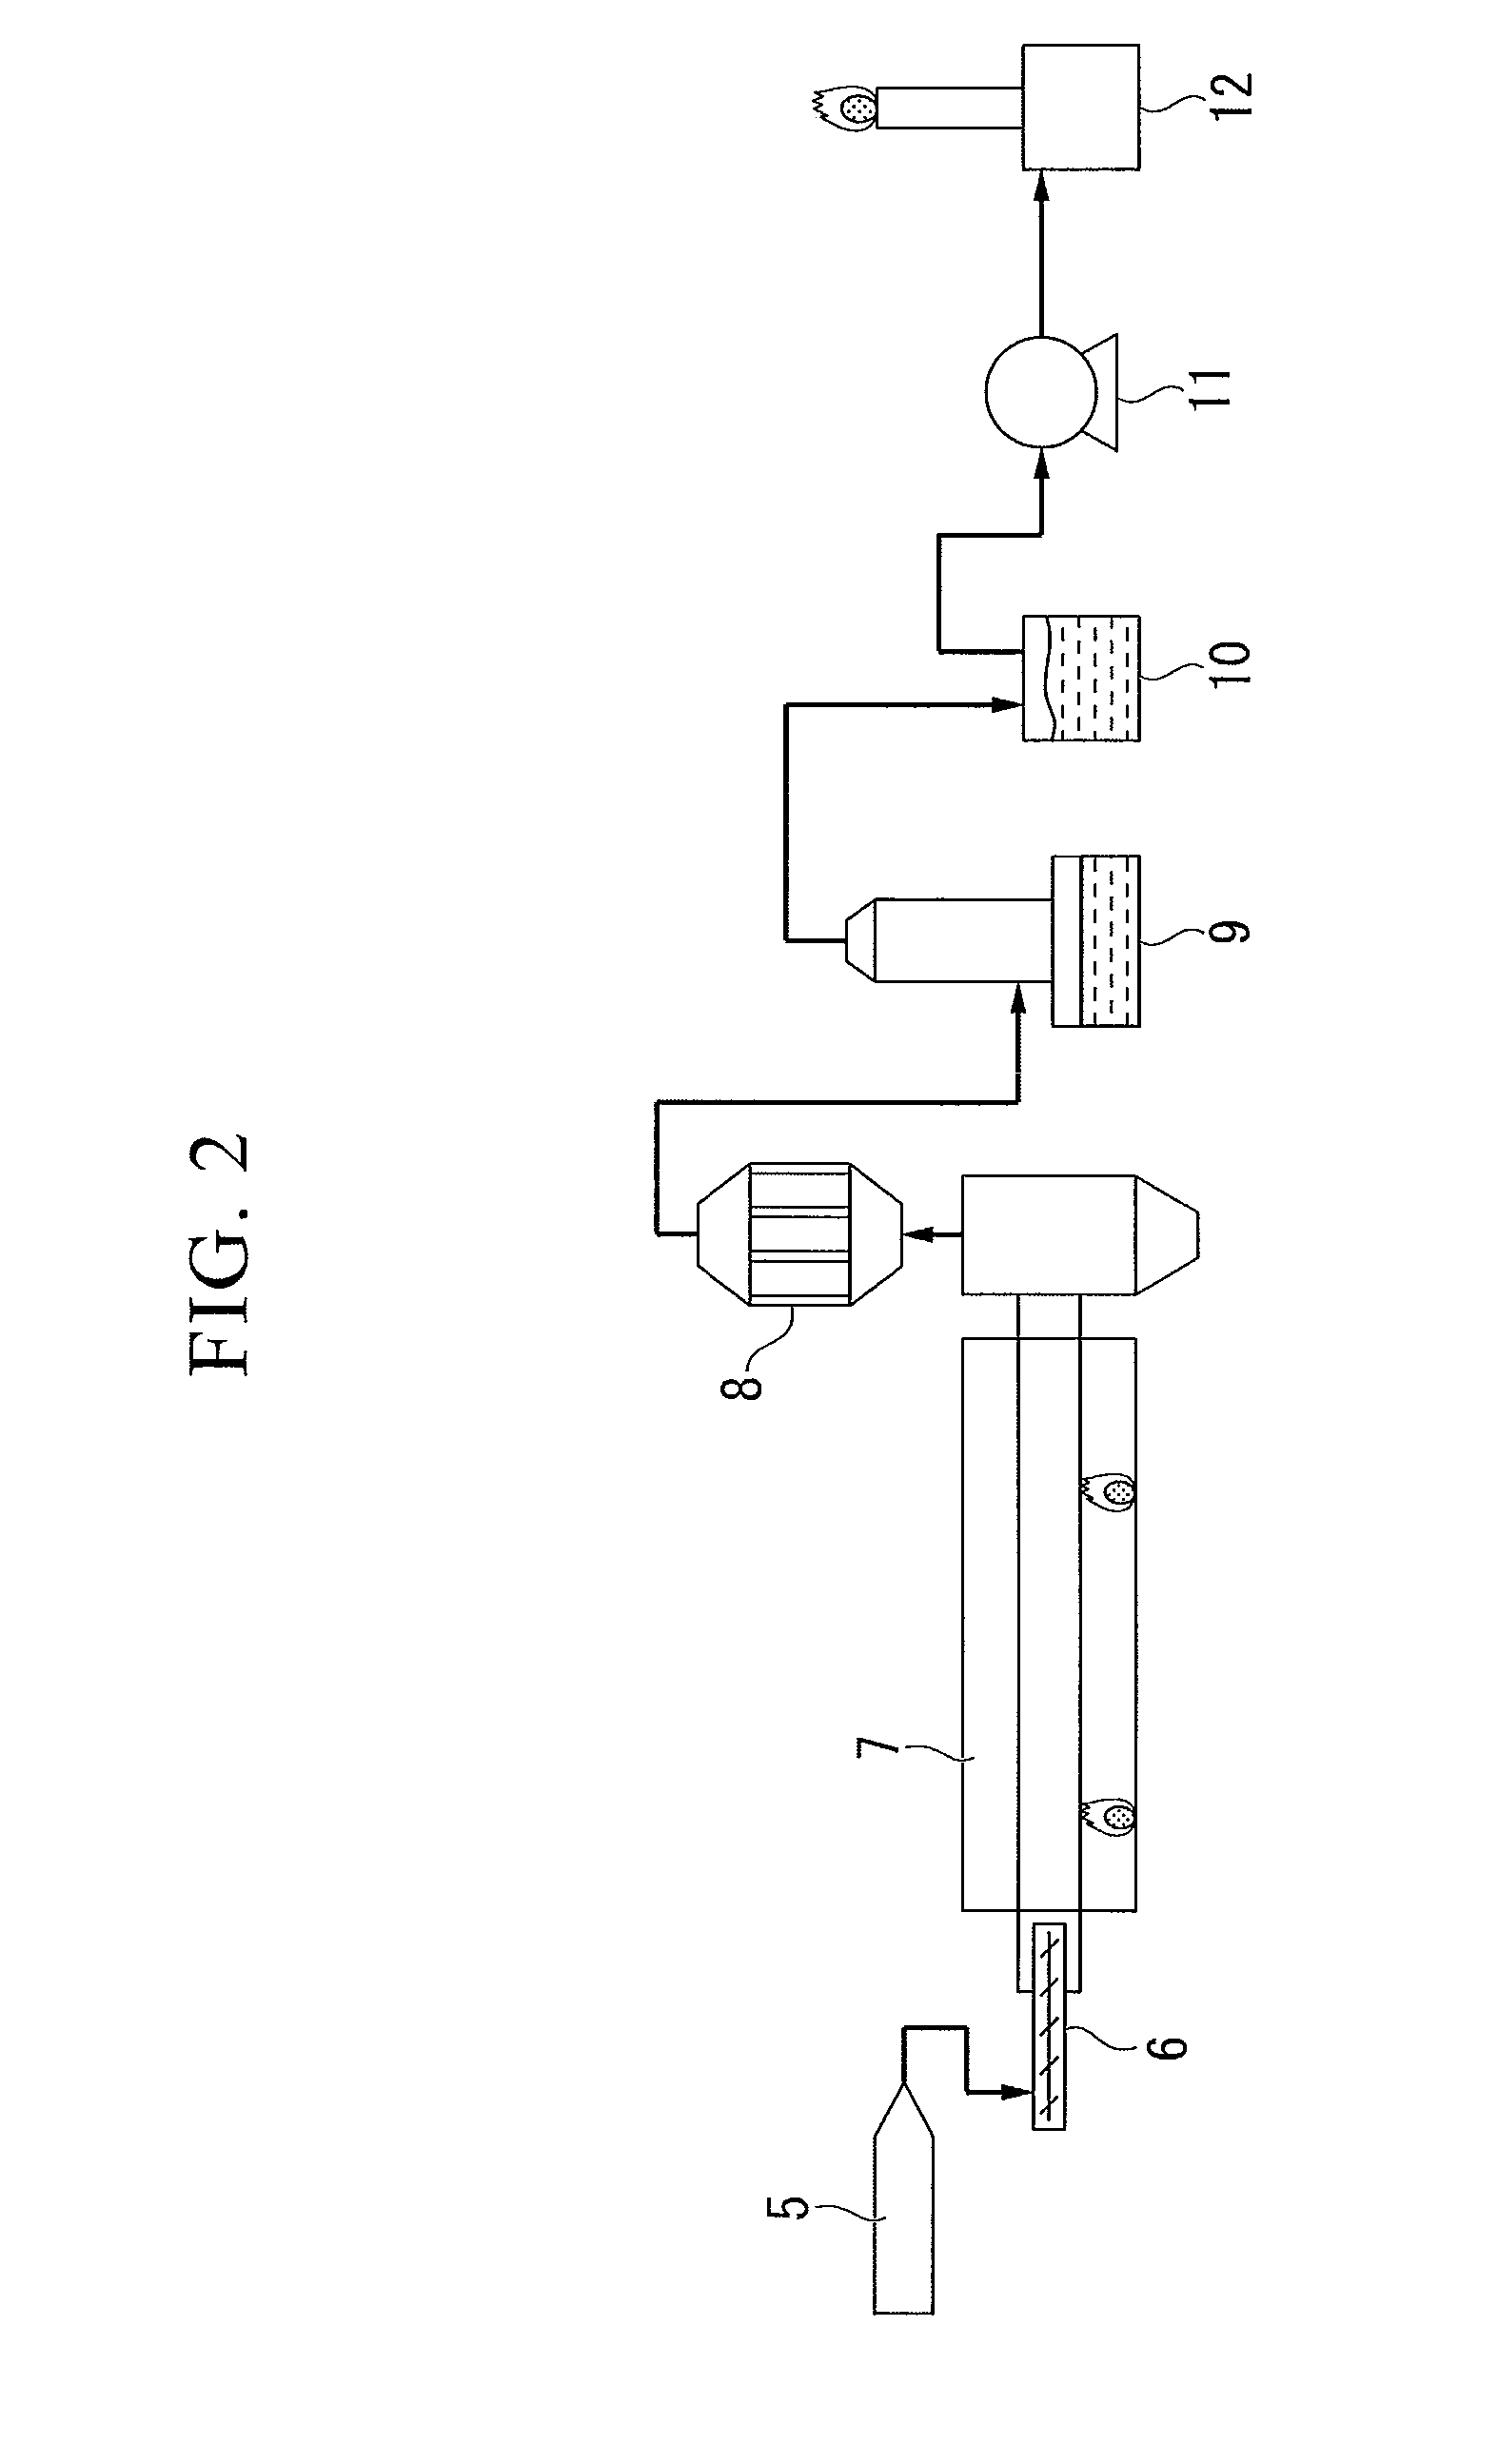 Catalyst for reforming tar-containing gas, method for preparing catalyst for reforming tar containing gas, method for reforming tar-containing gas using catalyst for reforming tar-containing gas, and method for regenerating catalyst for reforming tar-containing gas